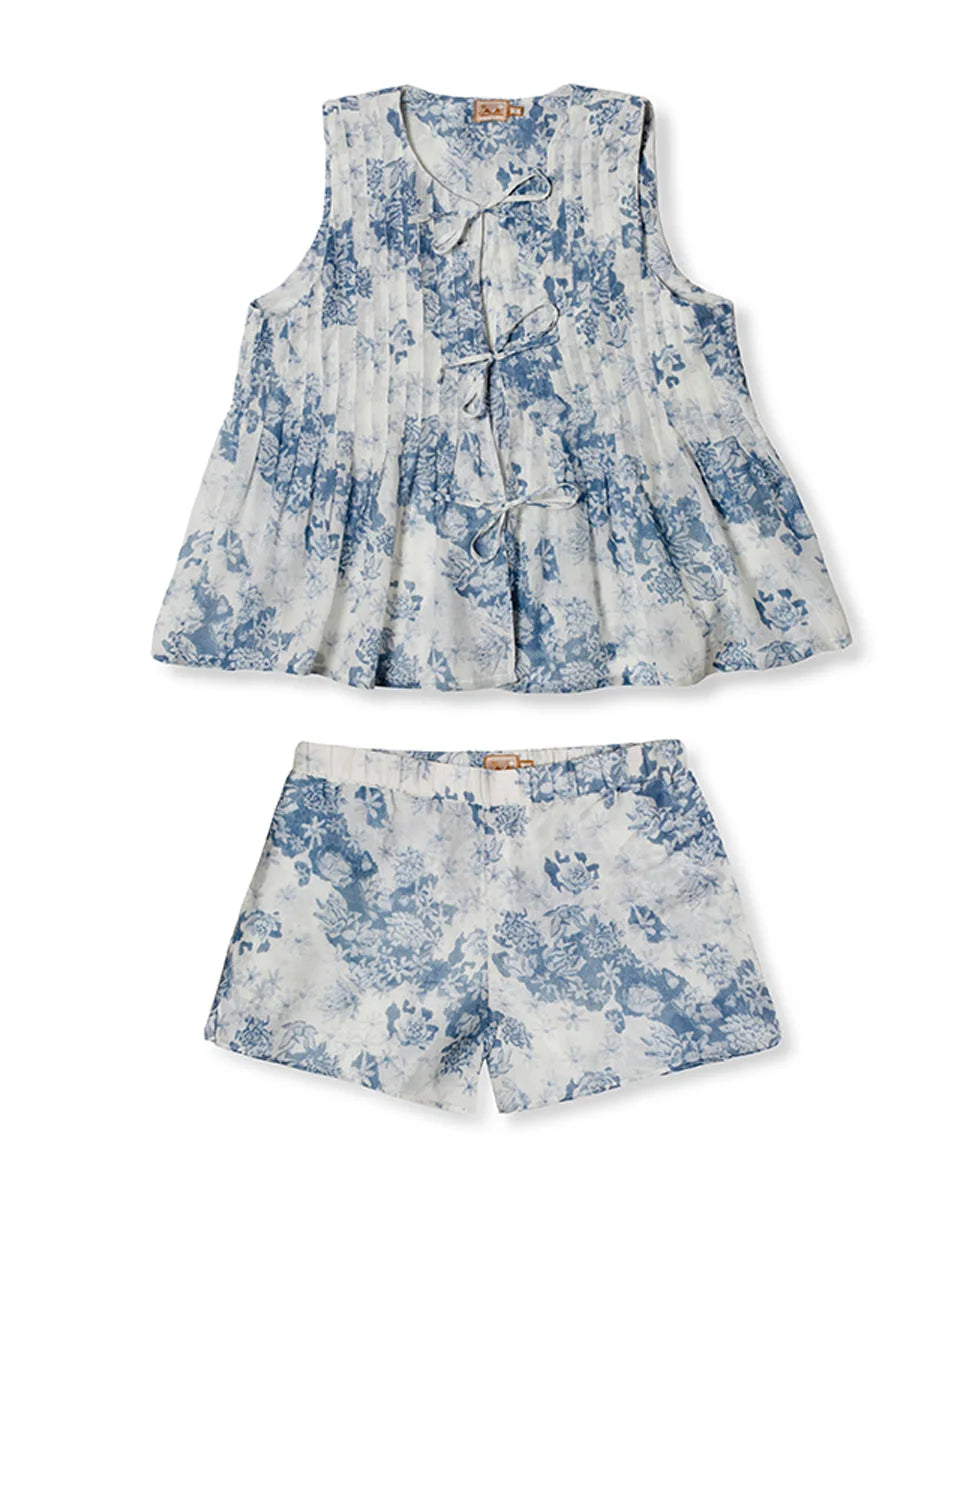 %shop_name_% Desmond &amp; Dempsey_Flowers Of Time Pleated Cami &amp; Shorts Set _ Loungewear_ 1900.00